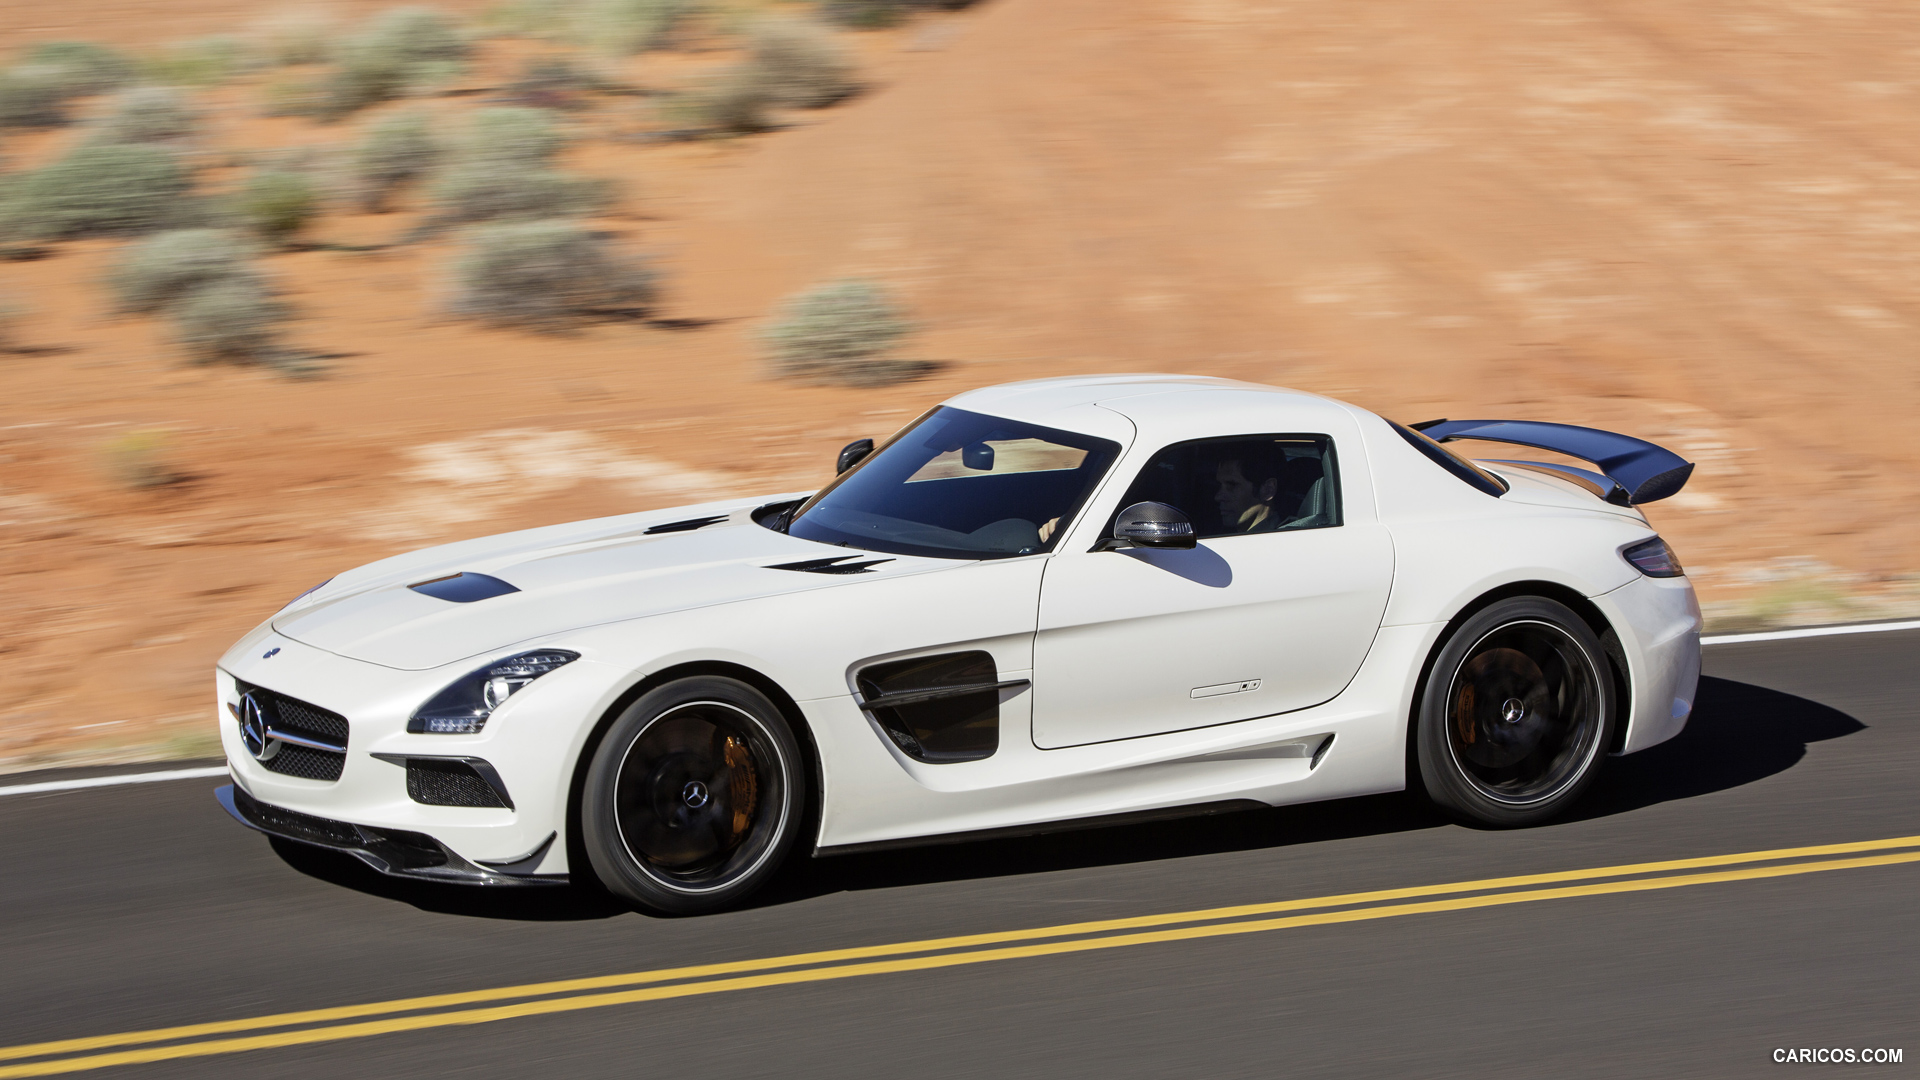 2014 Mercedes-Benz SLS AMG Coupe Black Series White - Side, #1 of 40